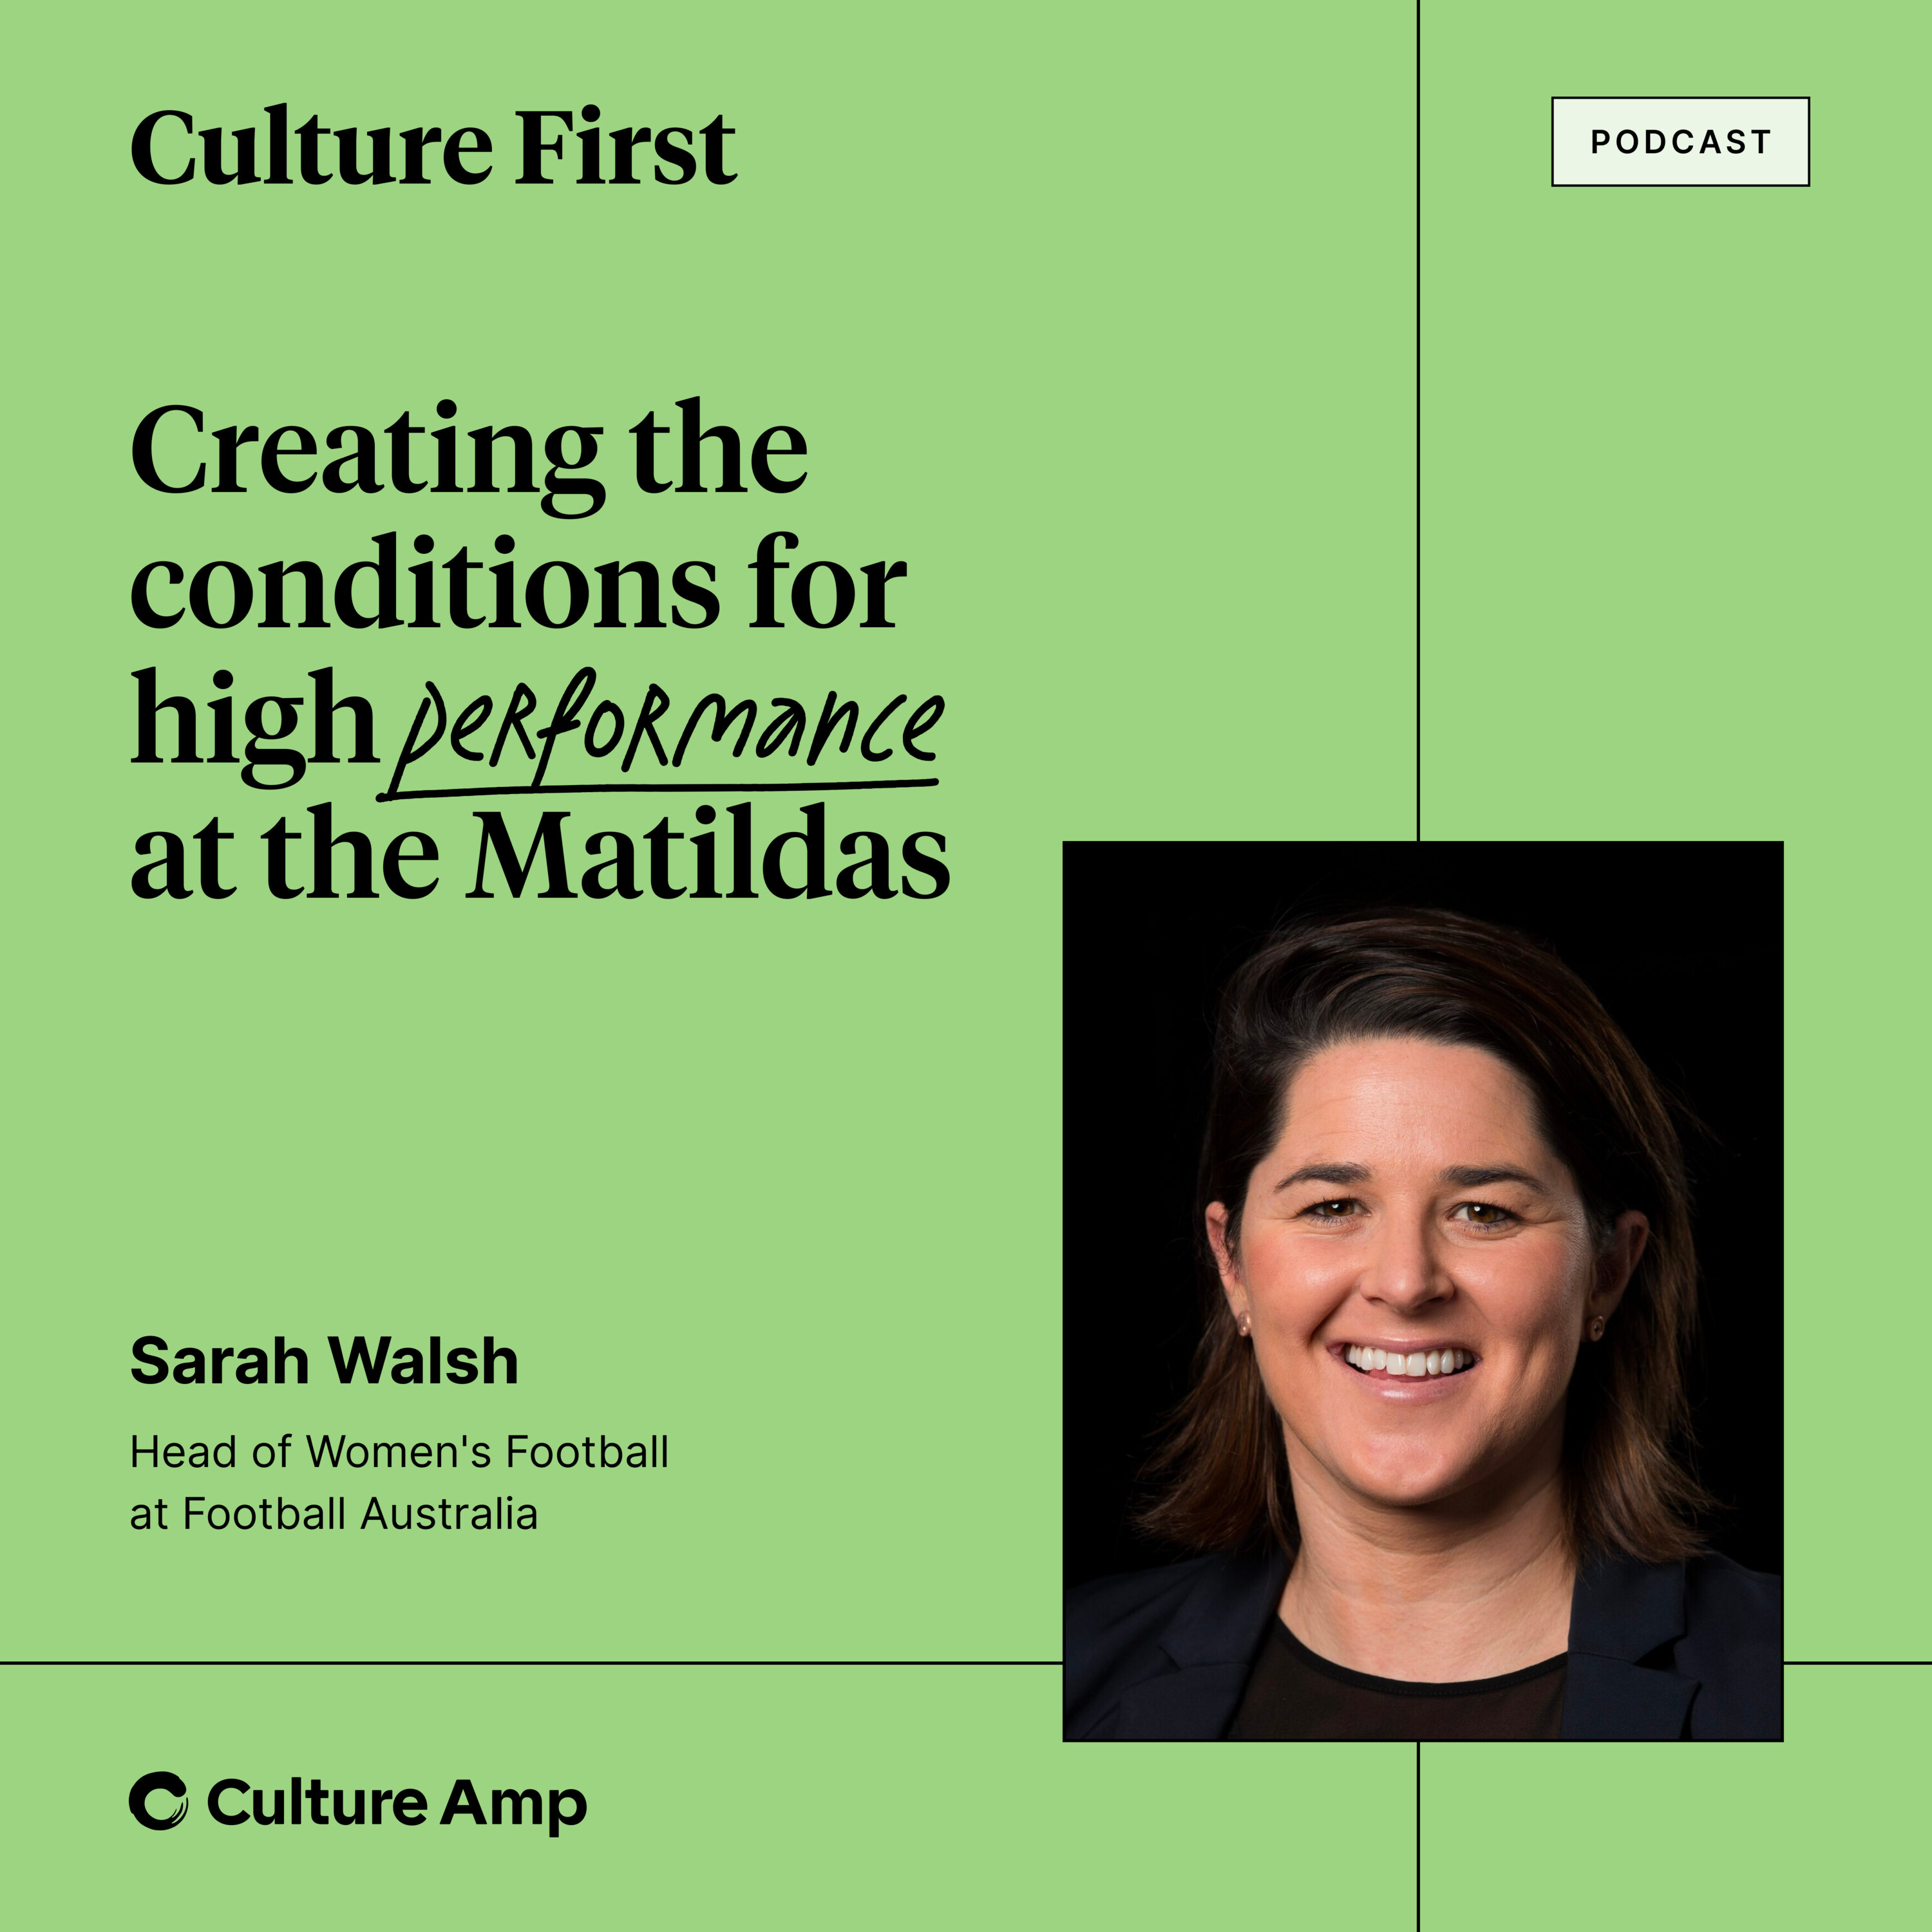 Sarah Walsh on creating the conditions for high performance at the Matildas